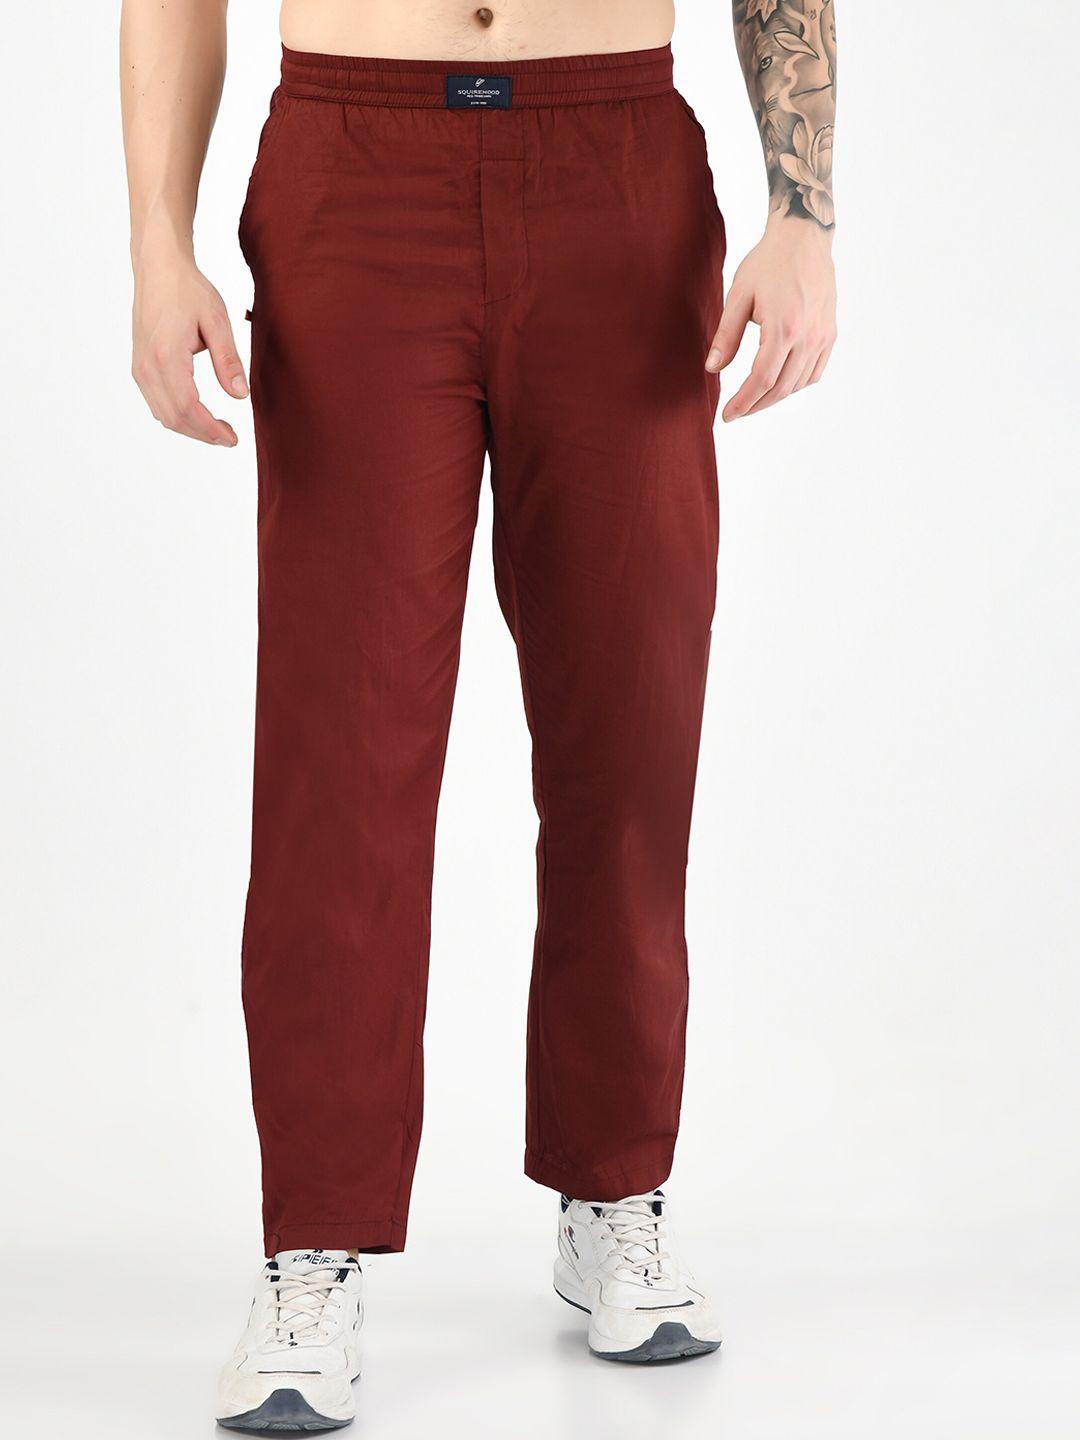 squirehood men mid-rise cotton twill sports track pant